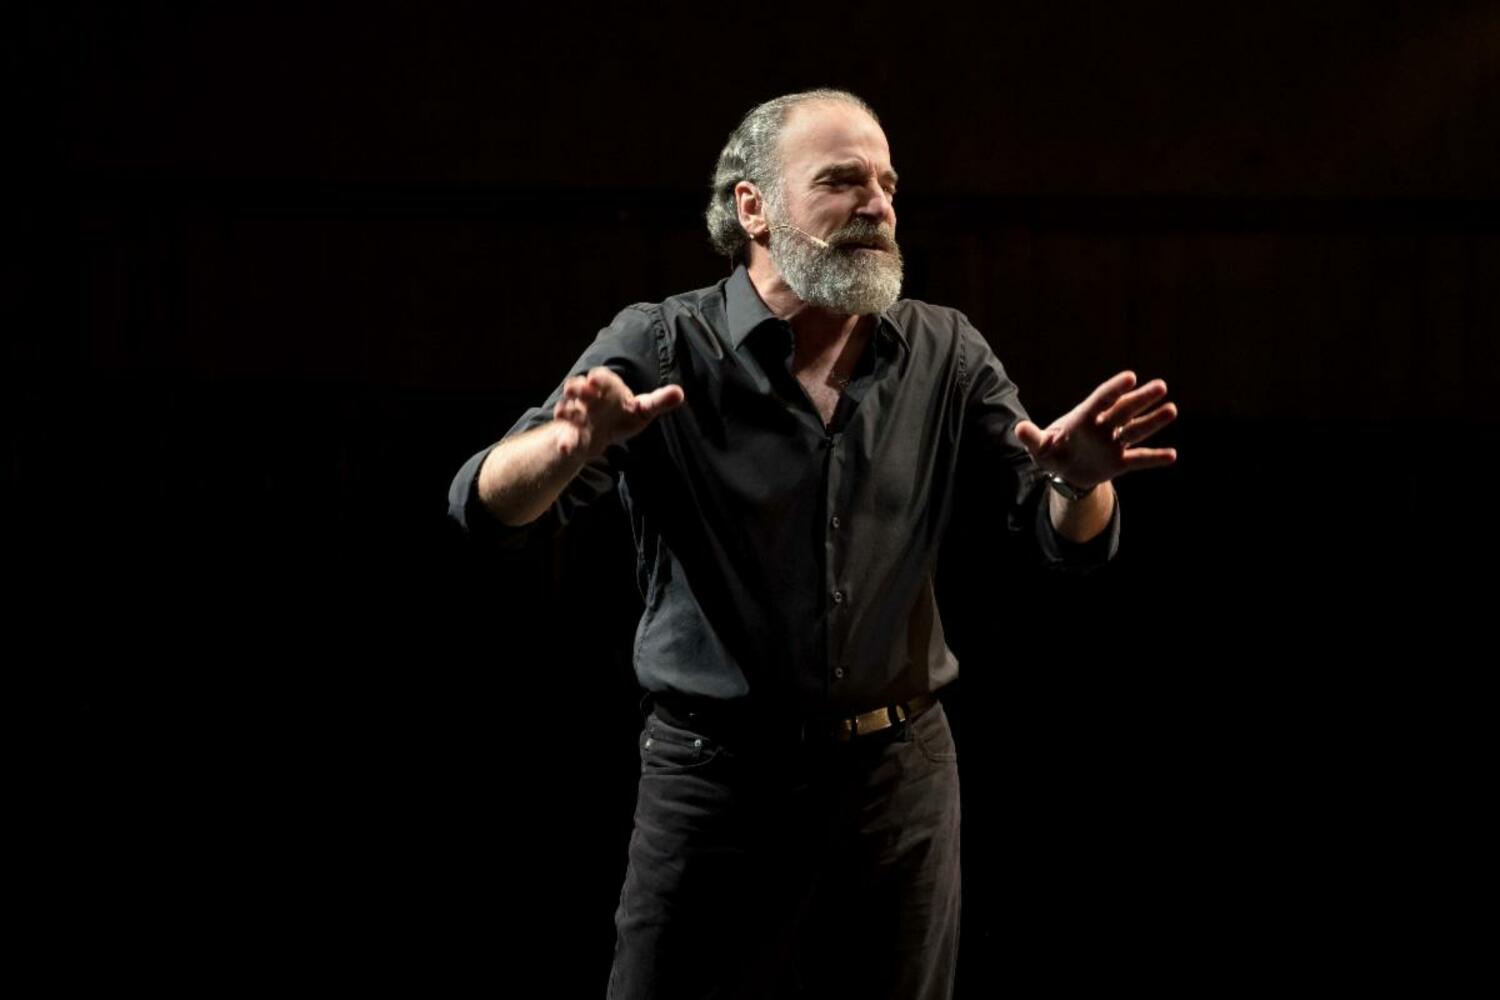 Broadway’s Mandy Patinkin performs at the Suffolk Theater on June 25. COURTESY SUFFOLK THEATER